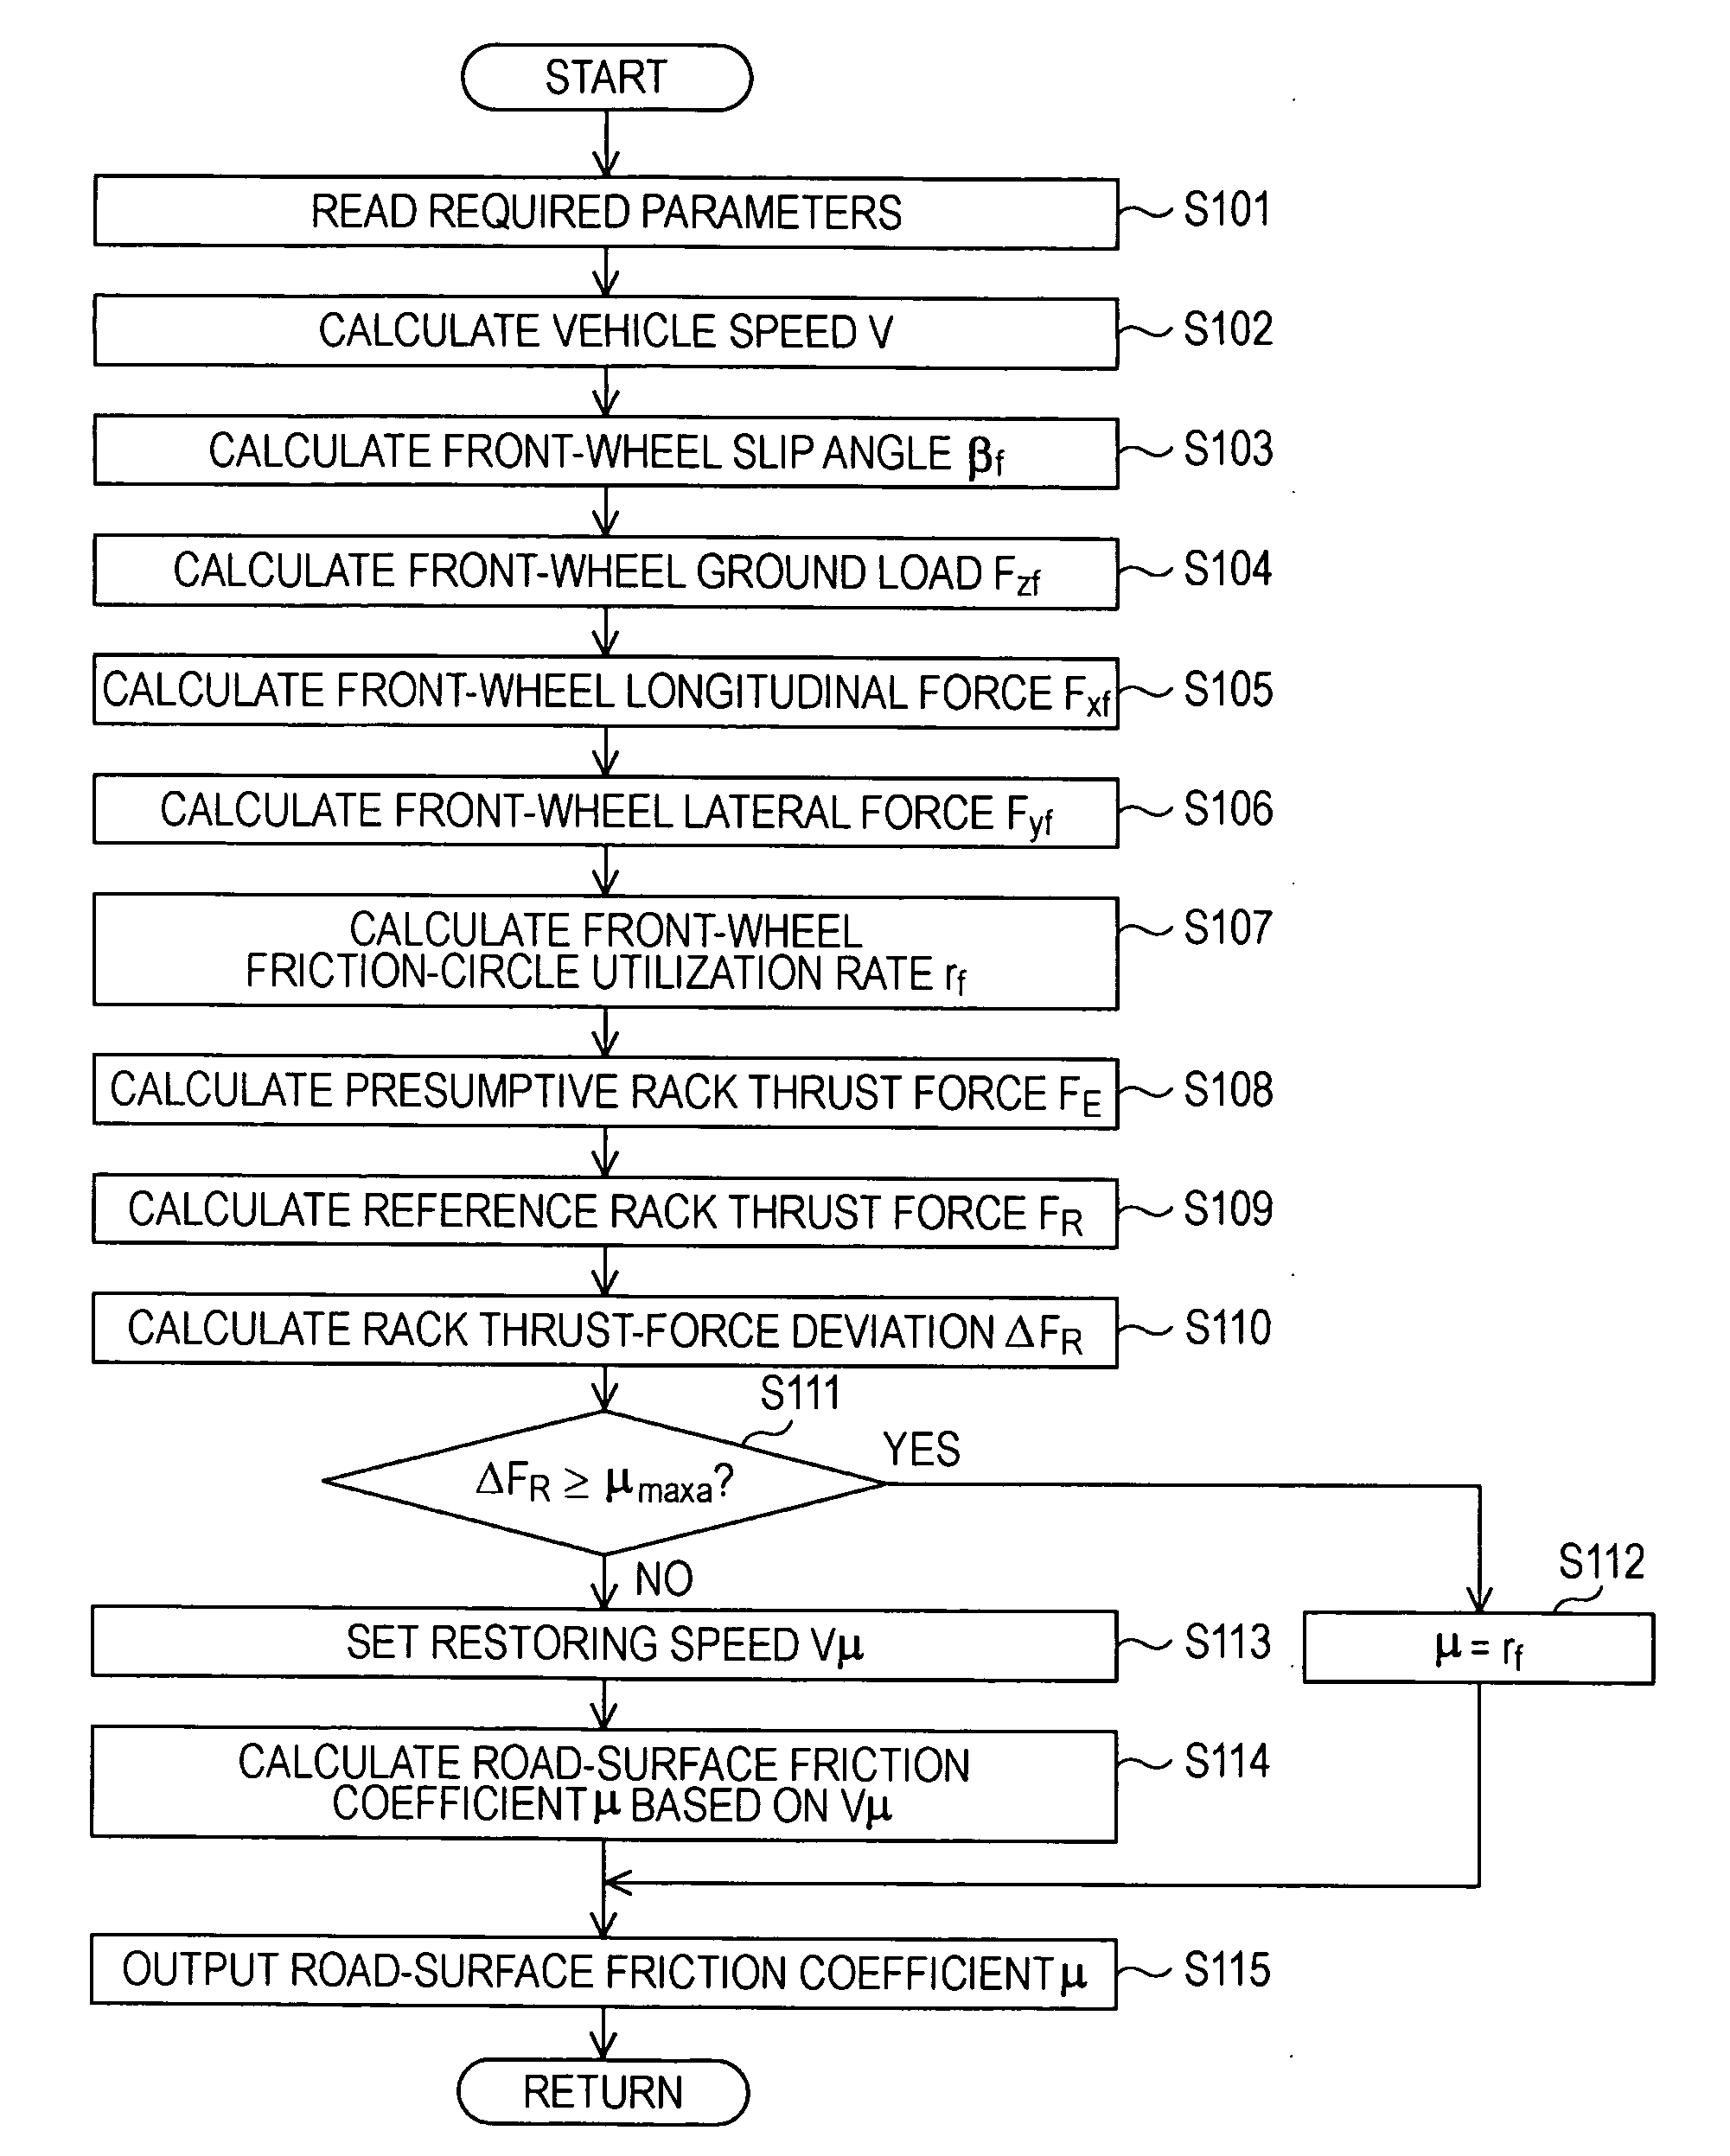 Road-surface friction-coefficient estimating device